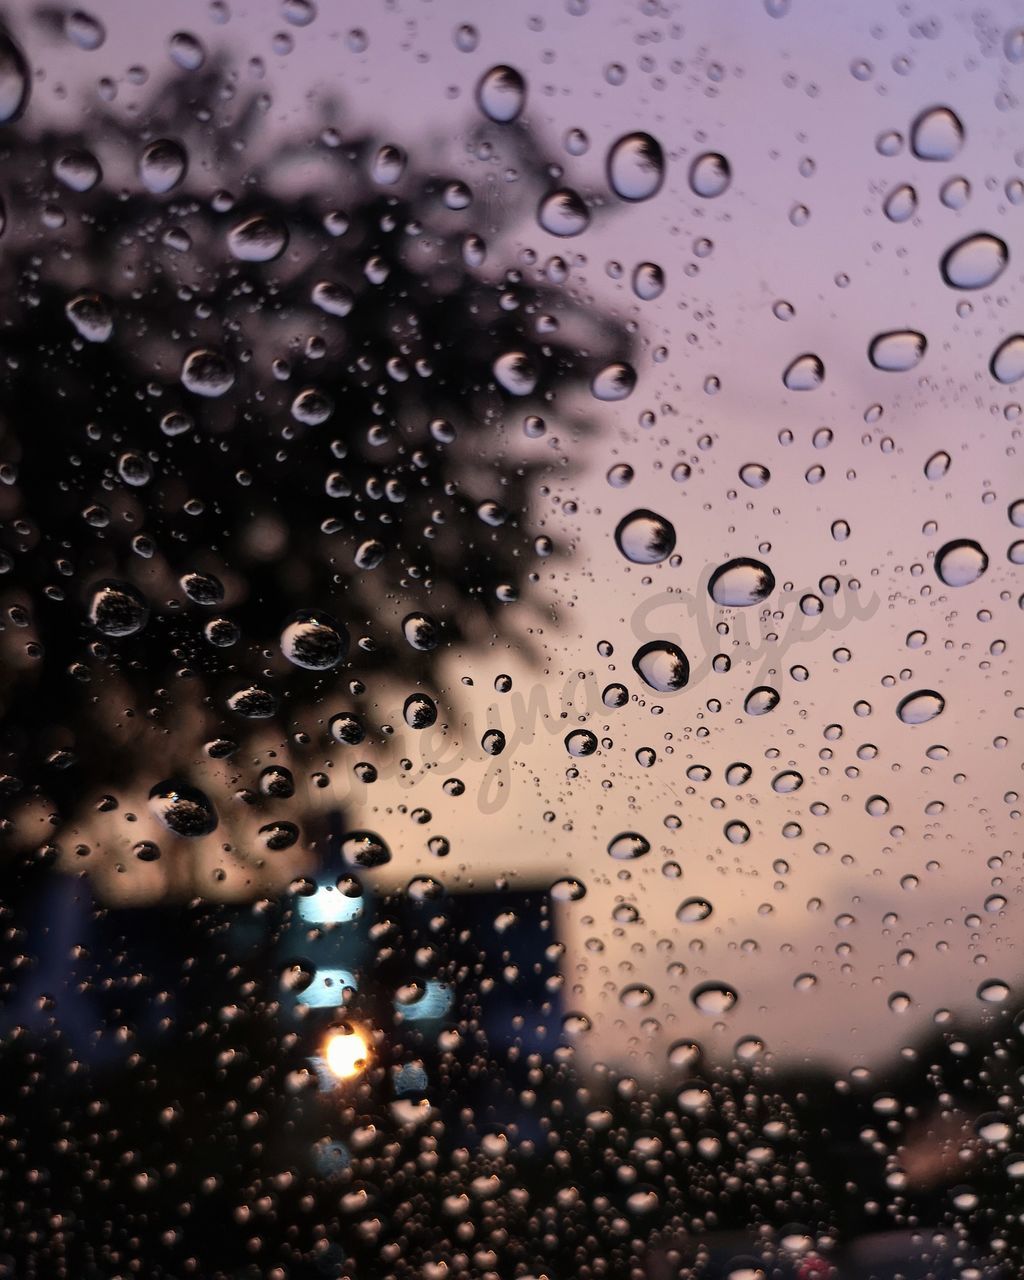 CLOSE-UP OF RAINDROPS ON GLASS WINDOW